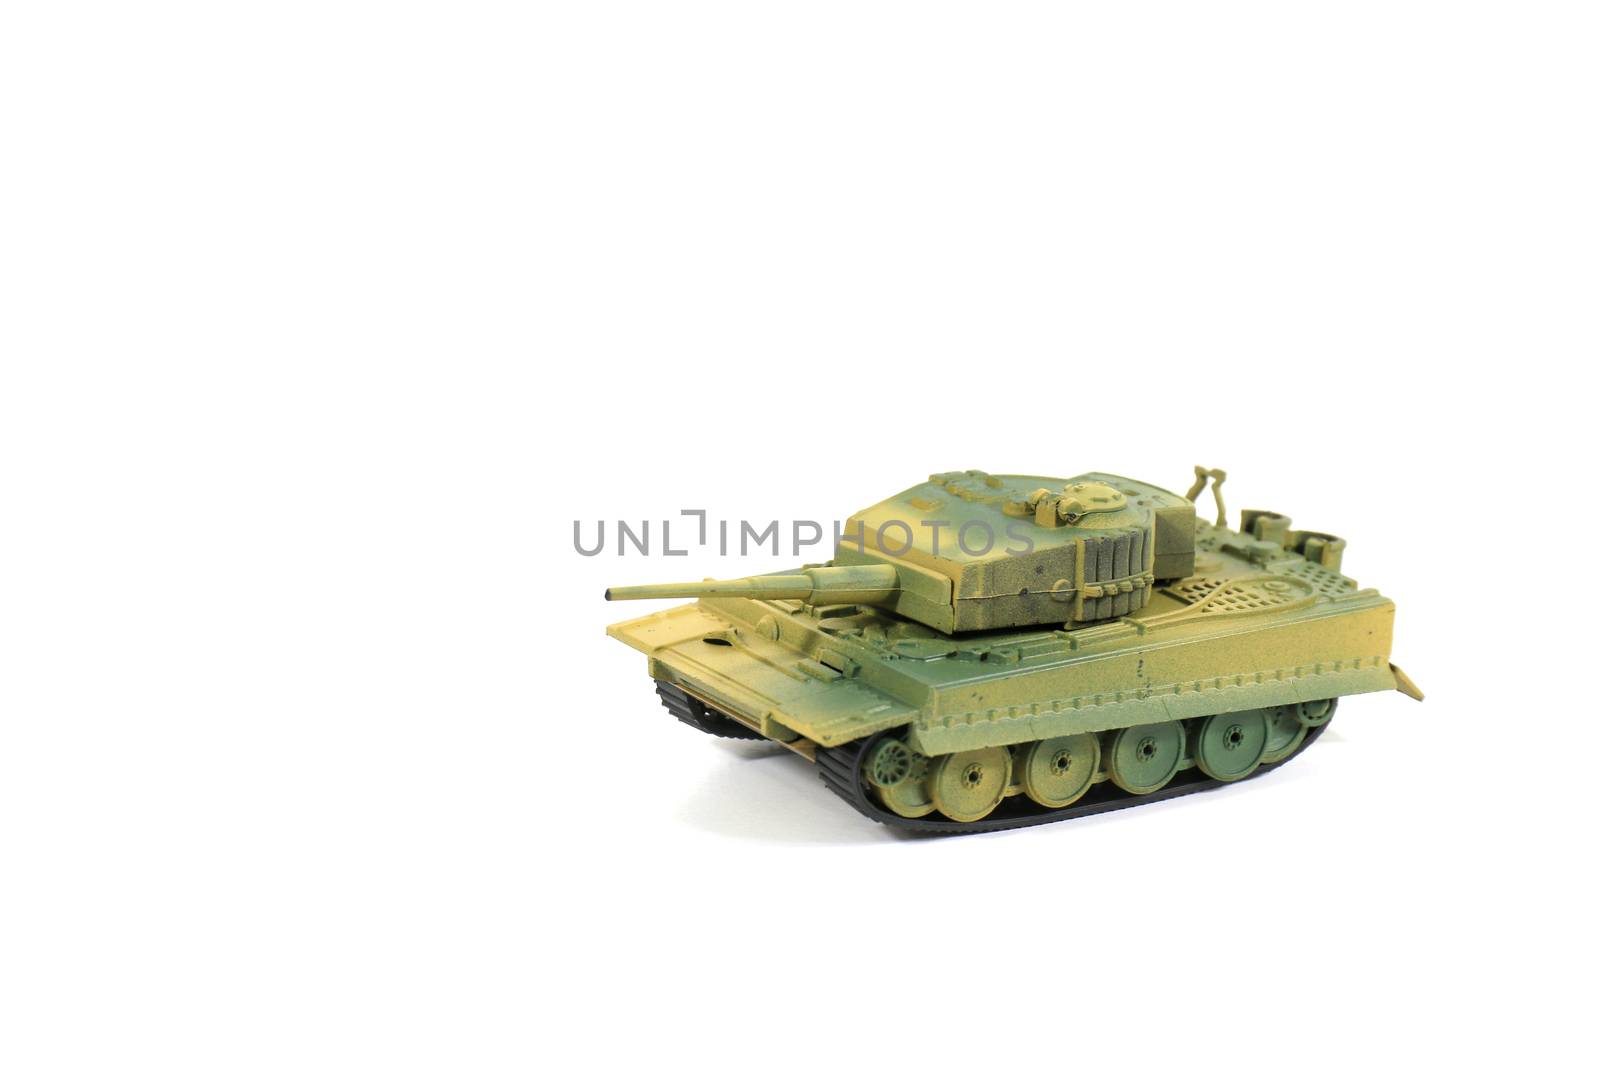 Toys Tank plastic on white background, War, fight army soldier tank Sample picture or War scenario concept by cgdeaw